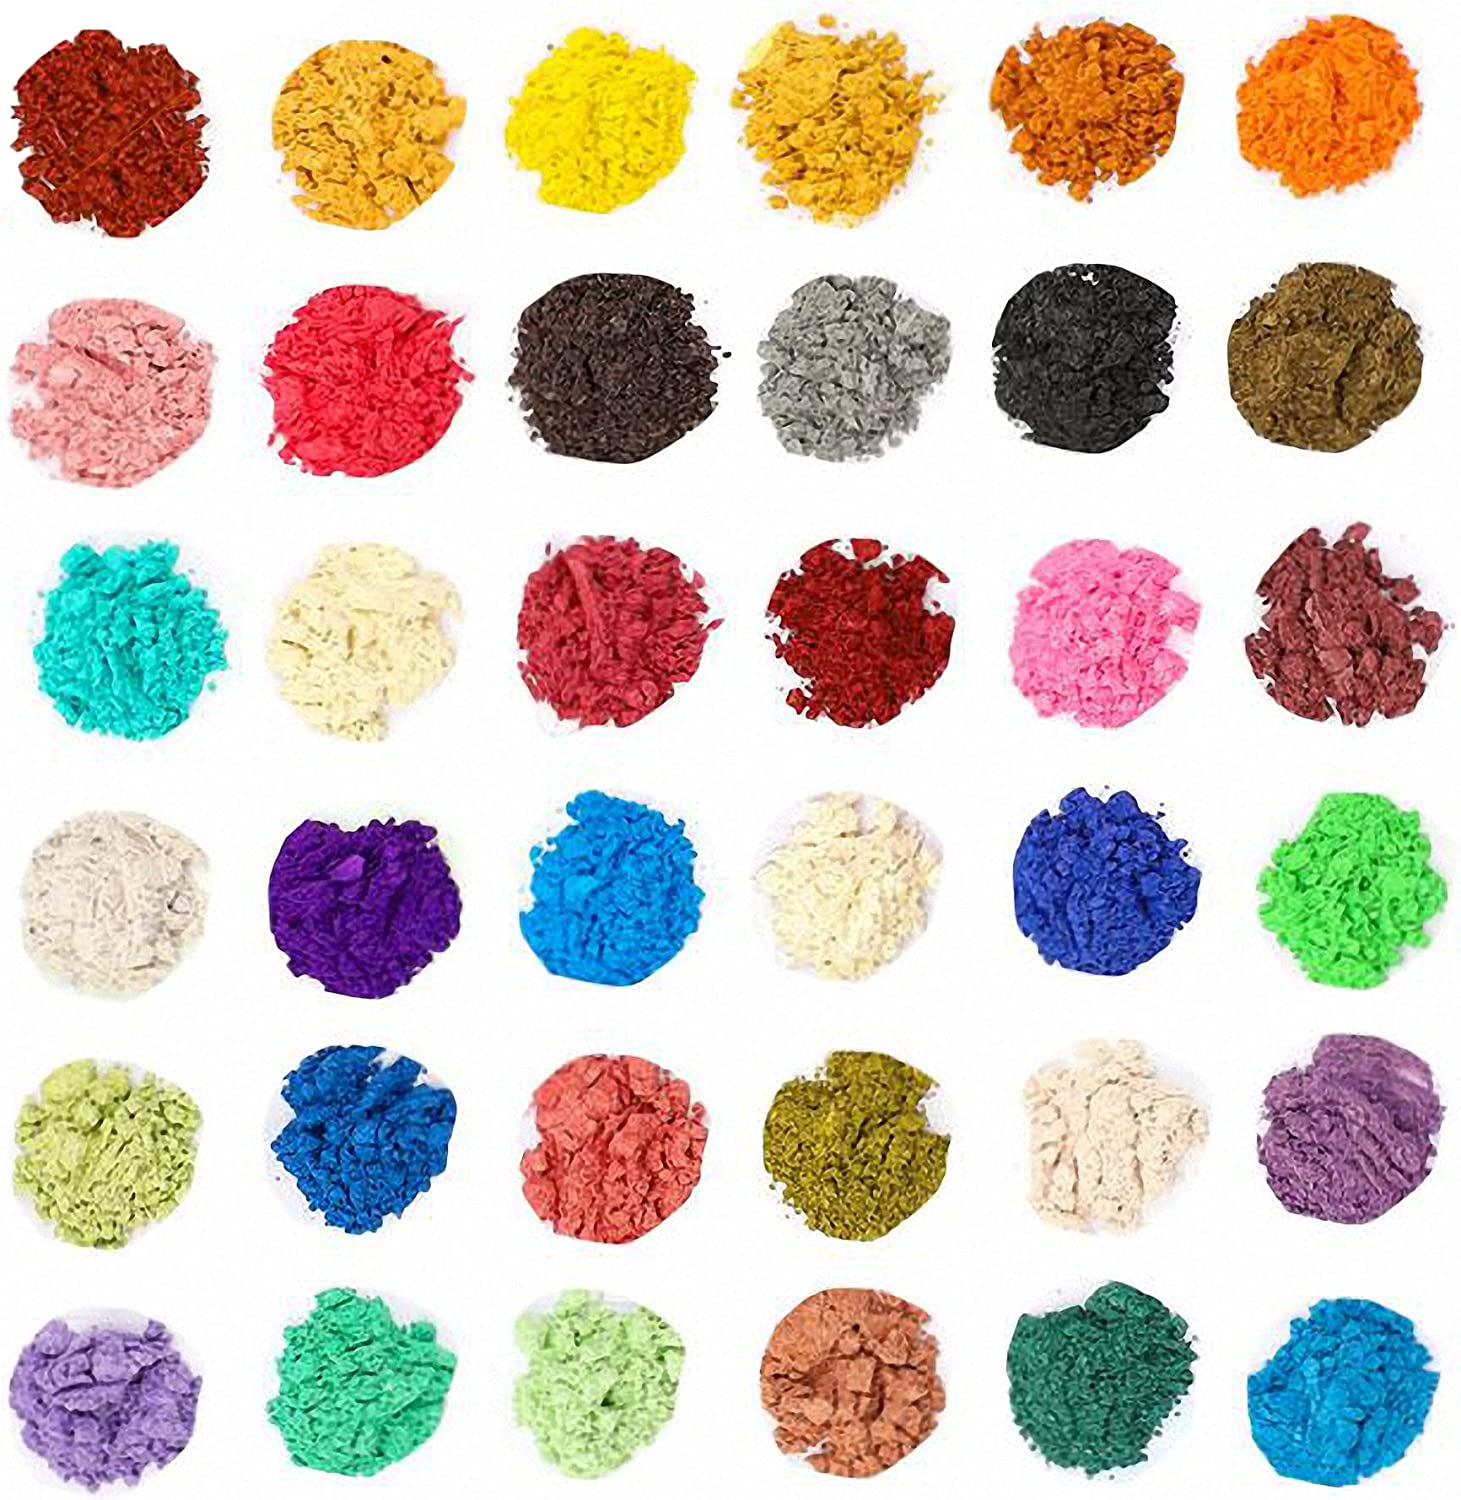 Mica Powder Epoxy Resin 15 Colors Shimmery Pigment Natural Soap